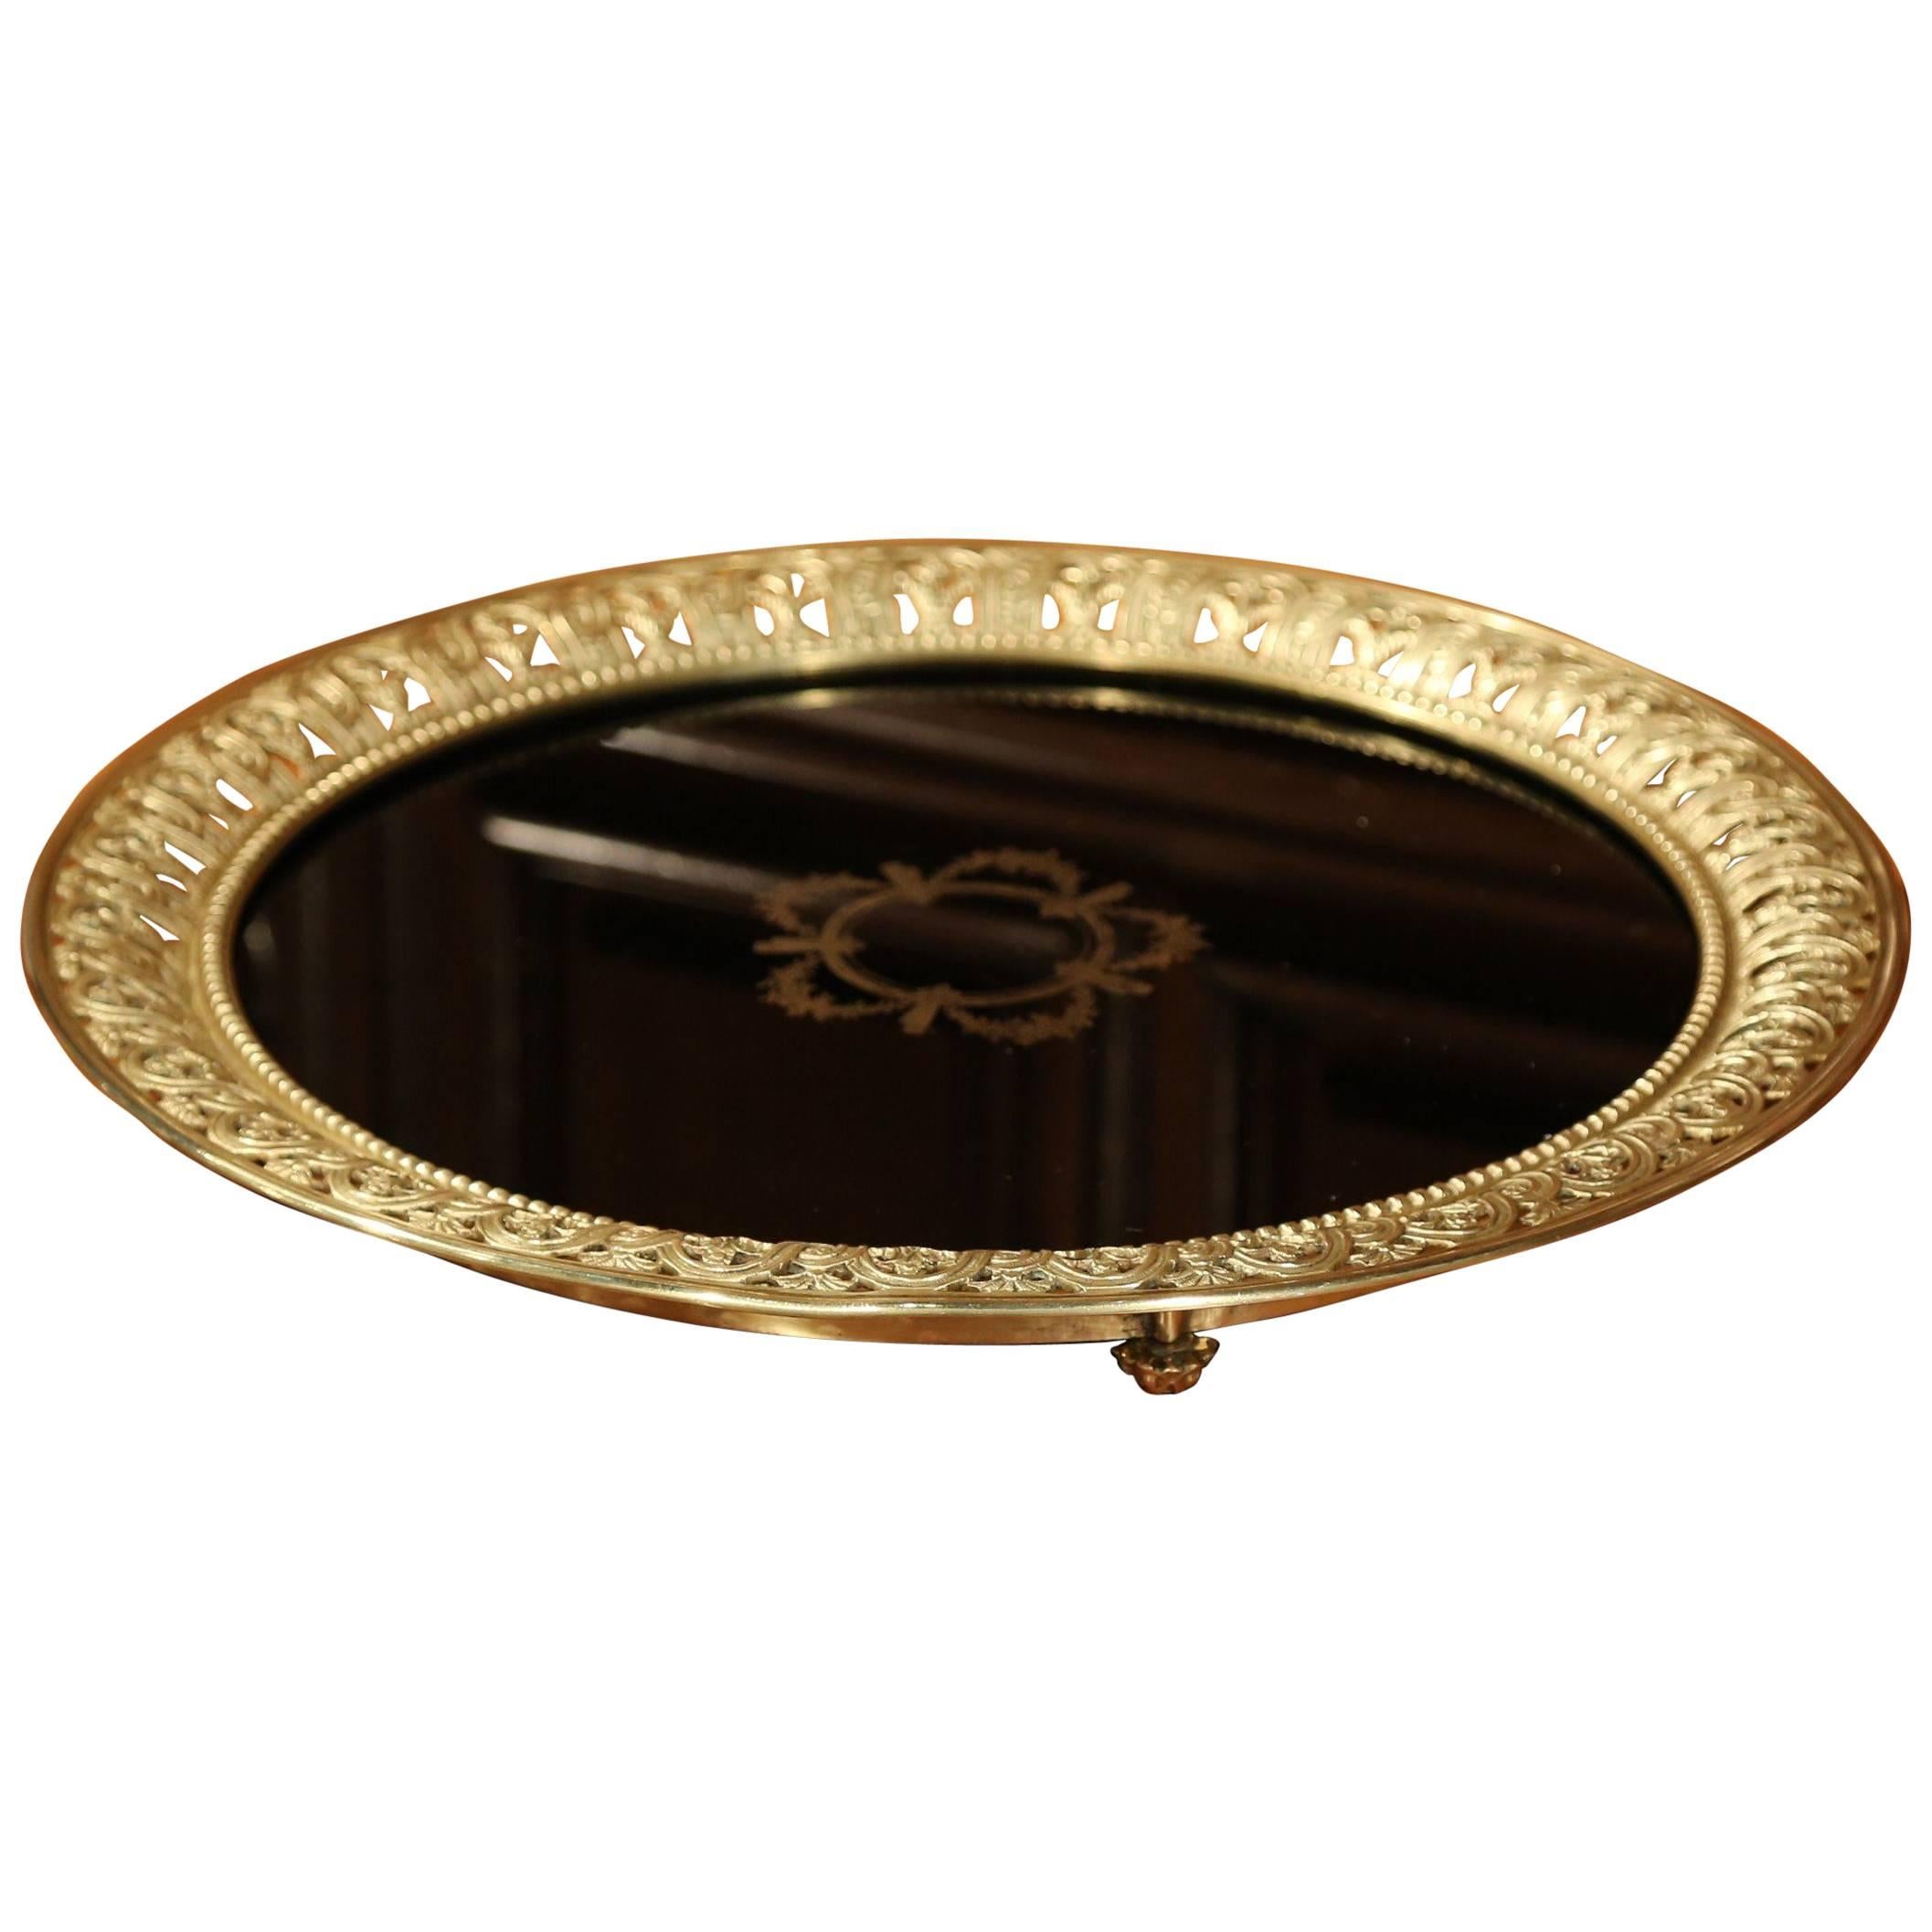 19th Century French Black Plateau Tray with Bronze Gallery and Gilt Decor